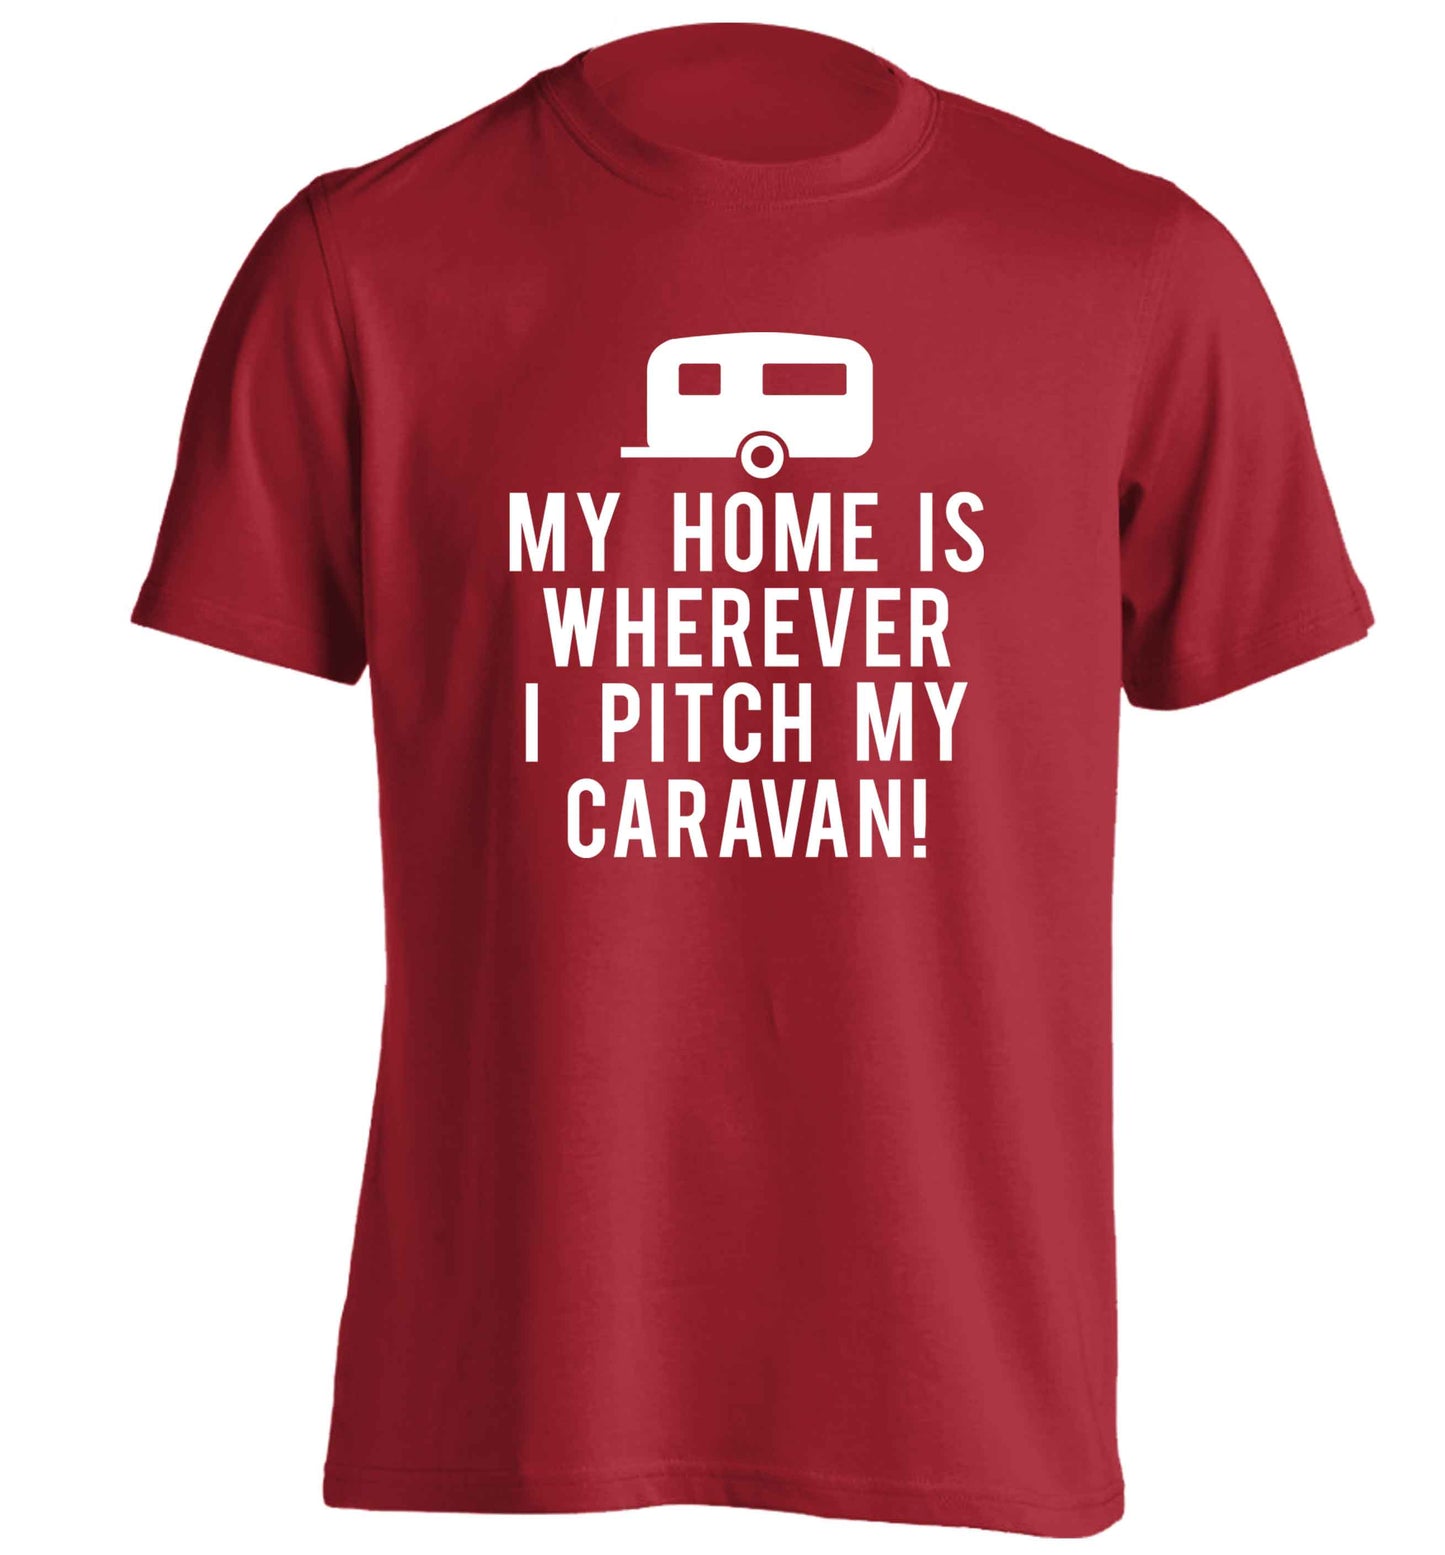 My home is wherever I pitch my caravan adults unisex red Tshirt 2XL